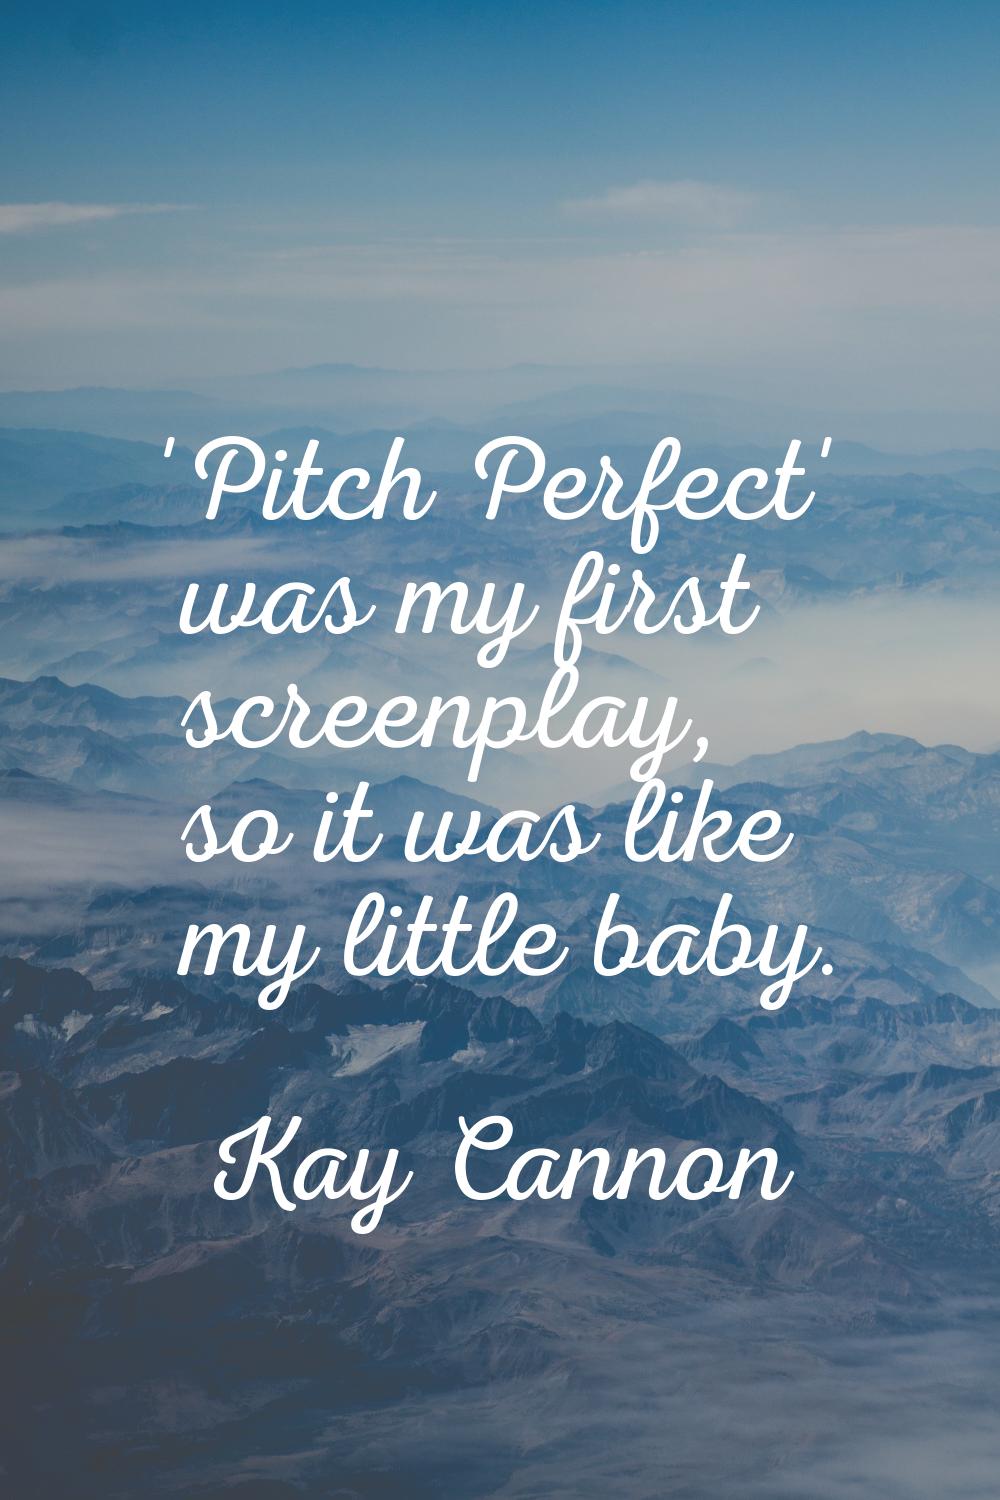 'Pitch Perfect' was my first screenplay, so it was like my little baby.